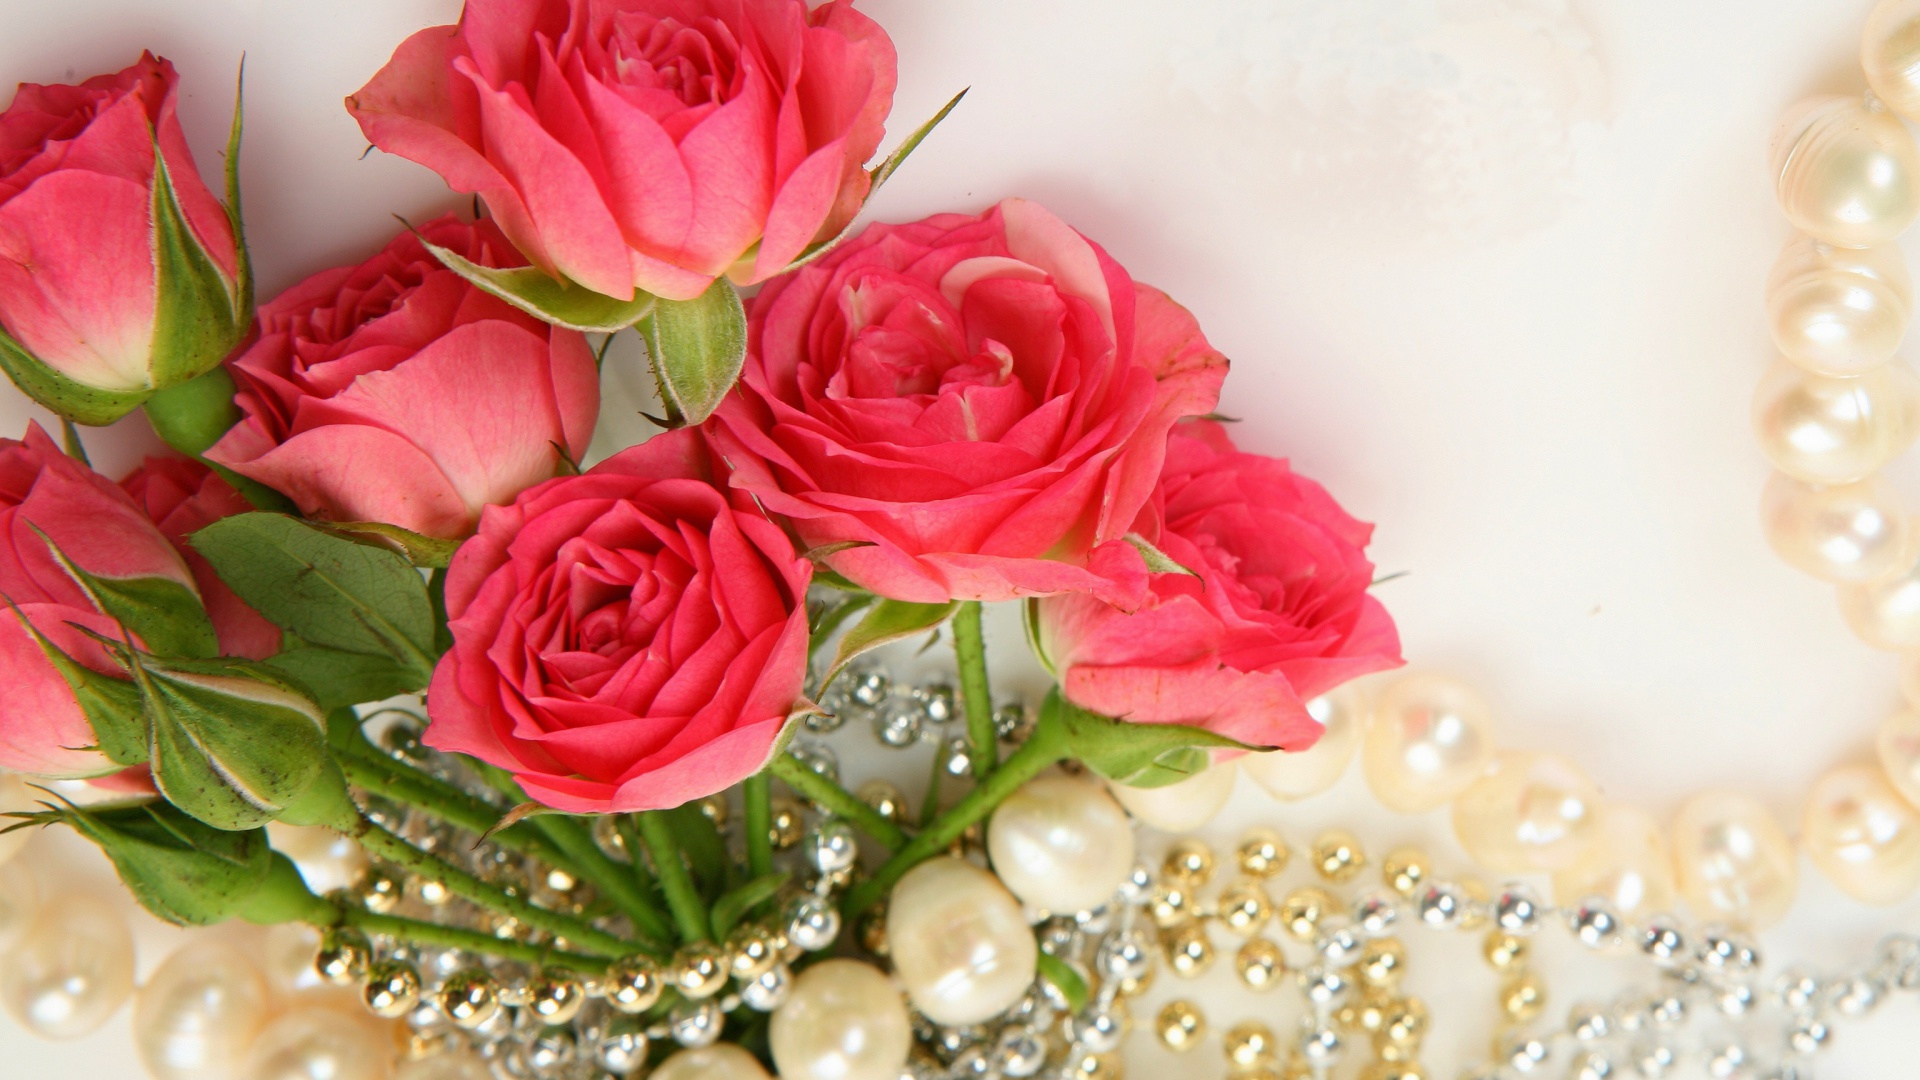 Necklace and Roses Bouquet wallpaper 1920x1080